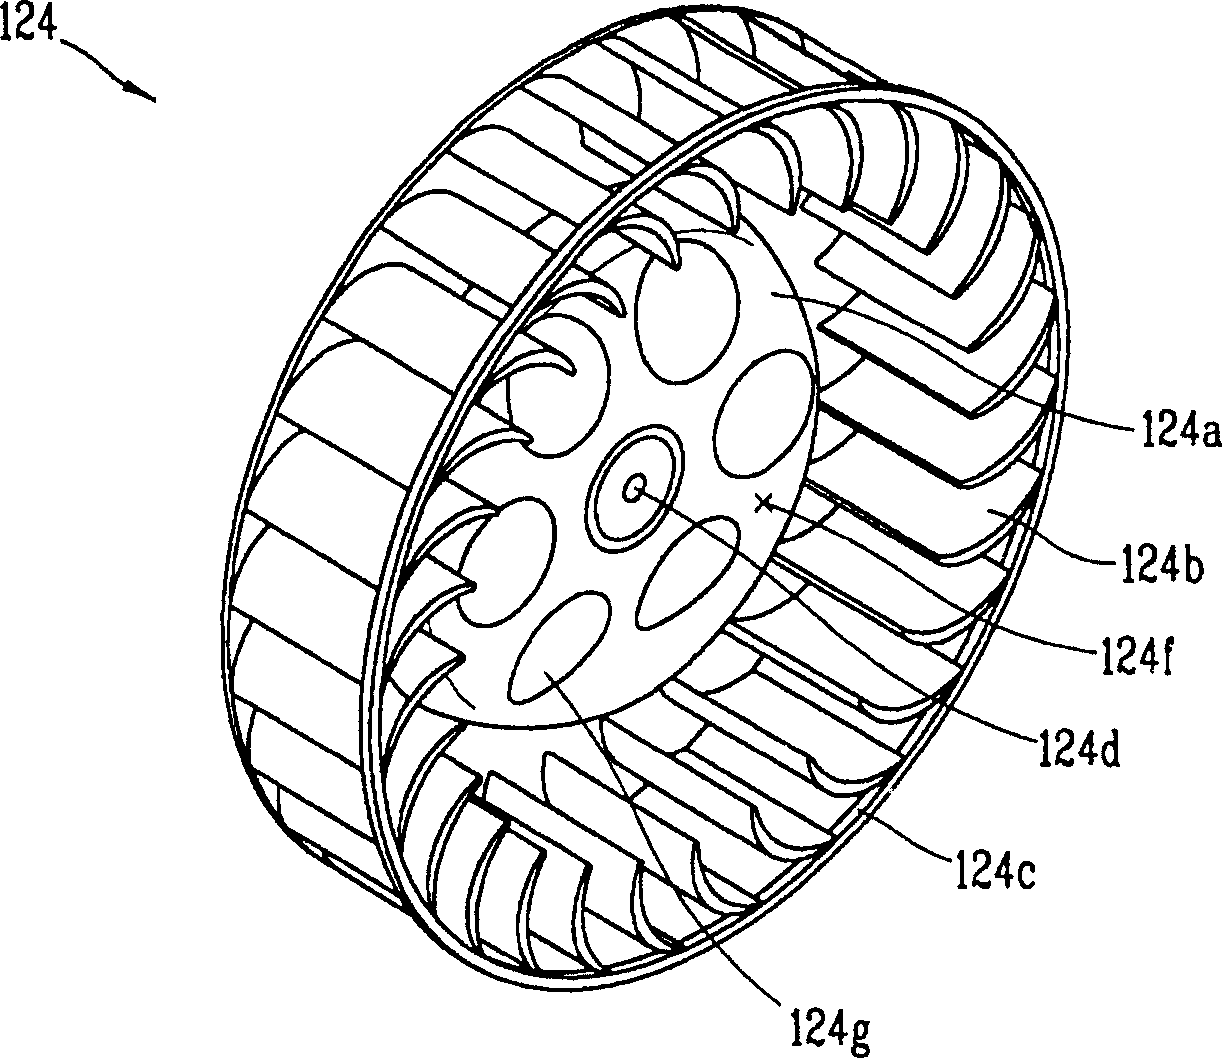 Centrifugal blower and air cleaner with the same